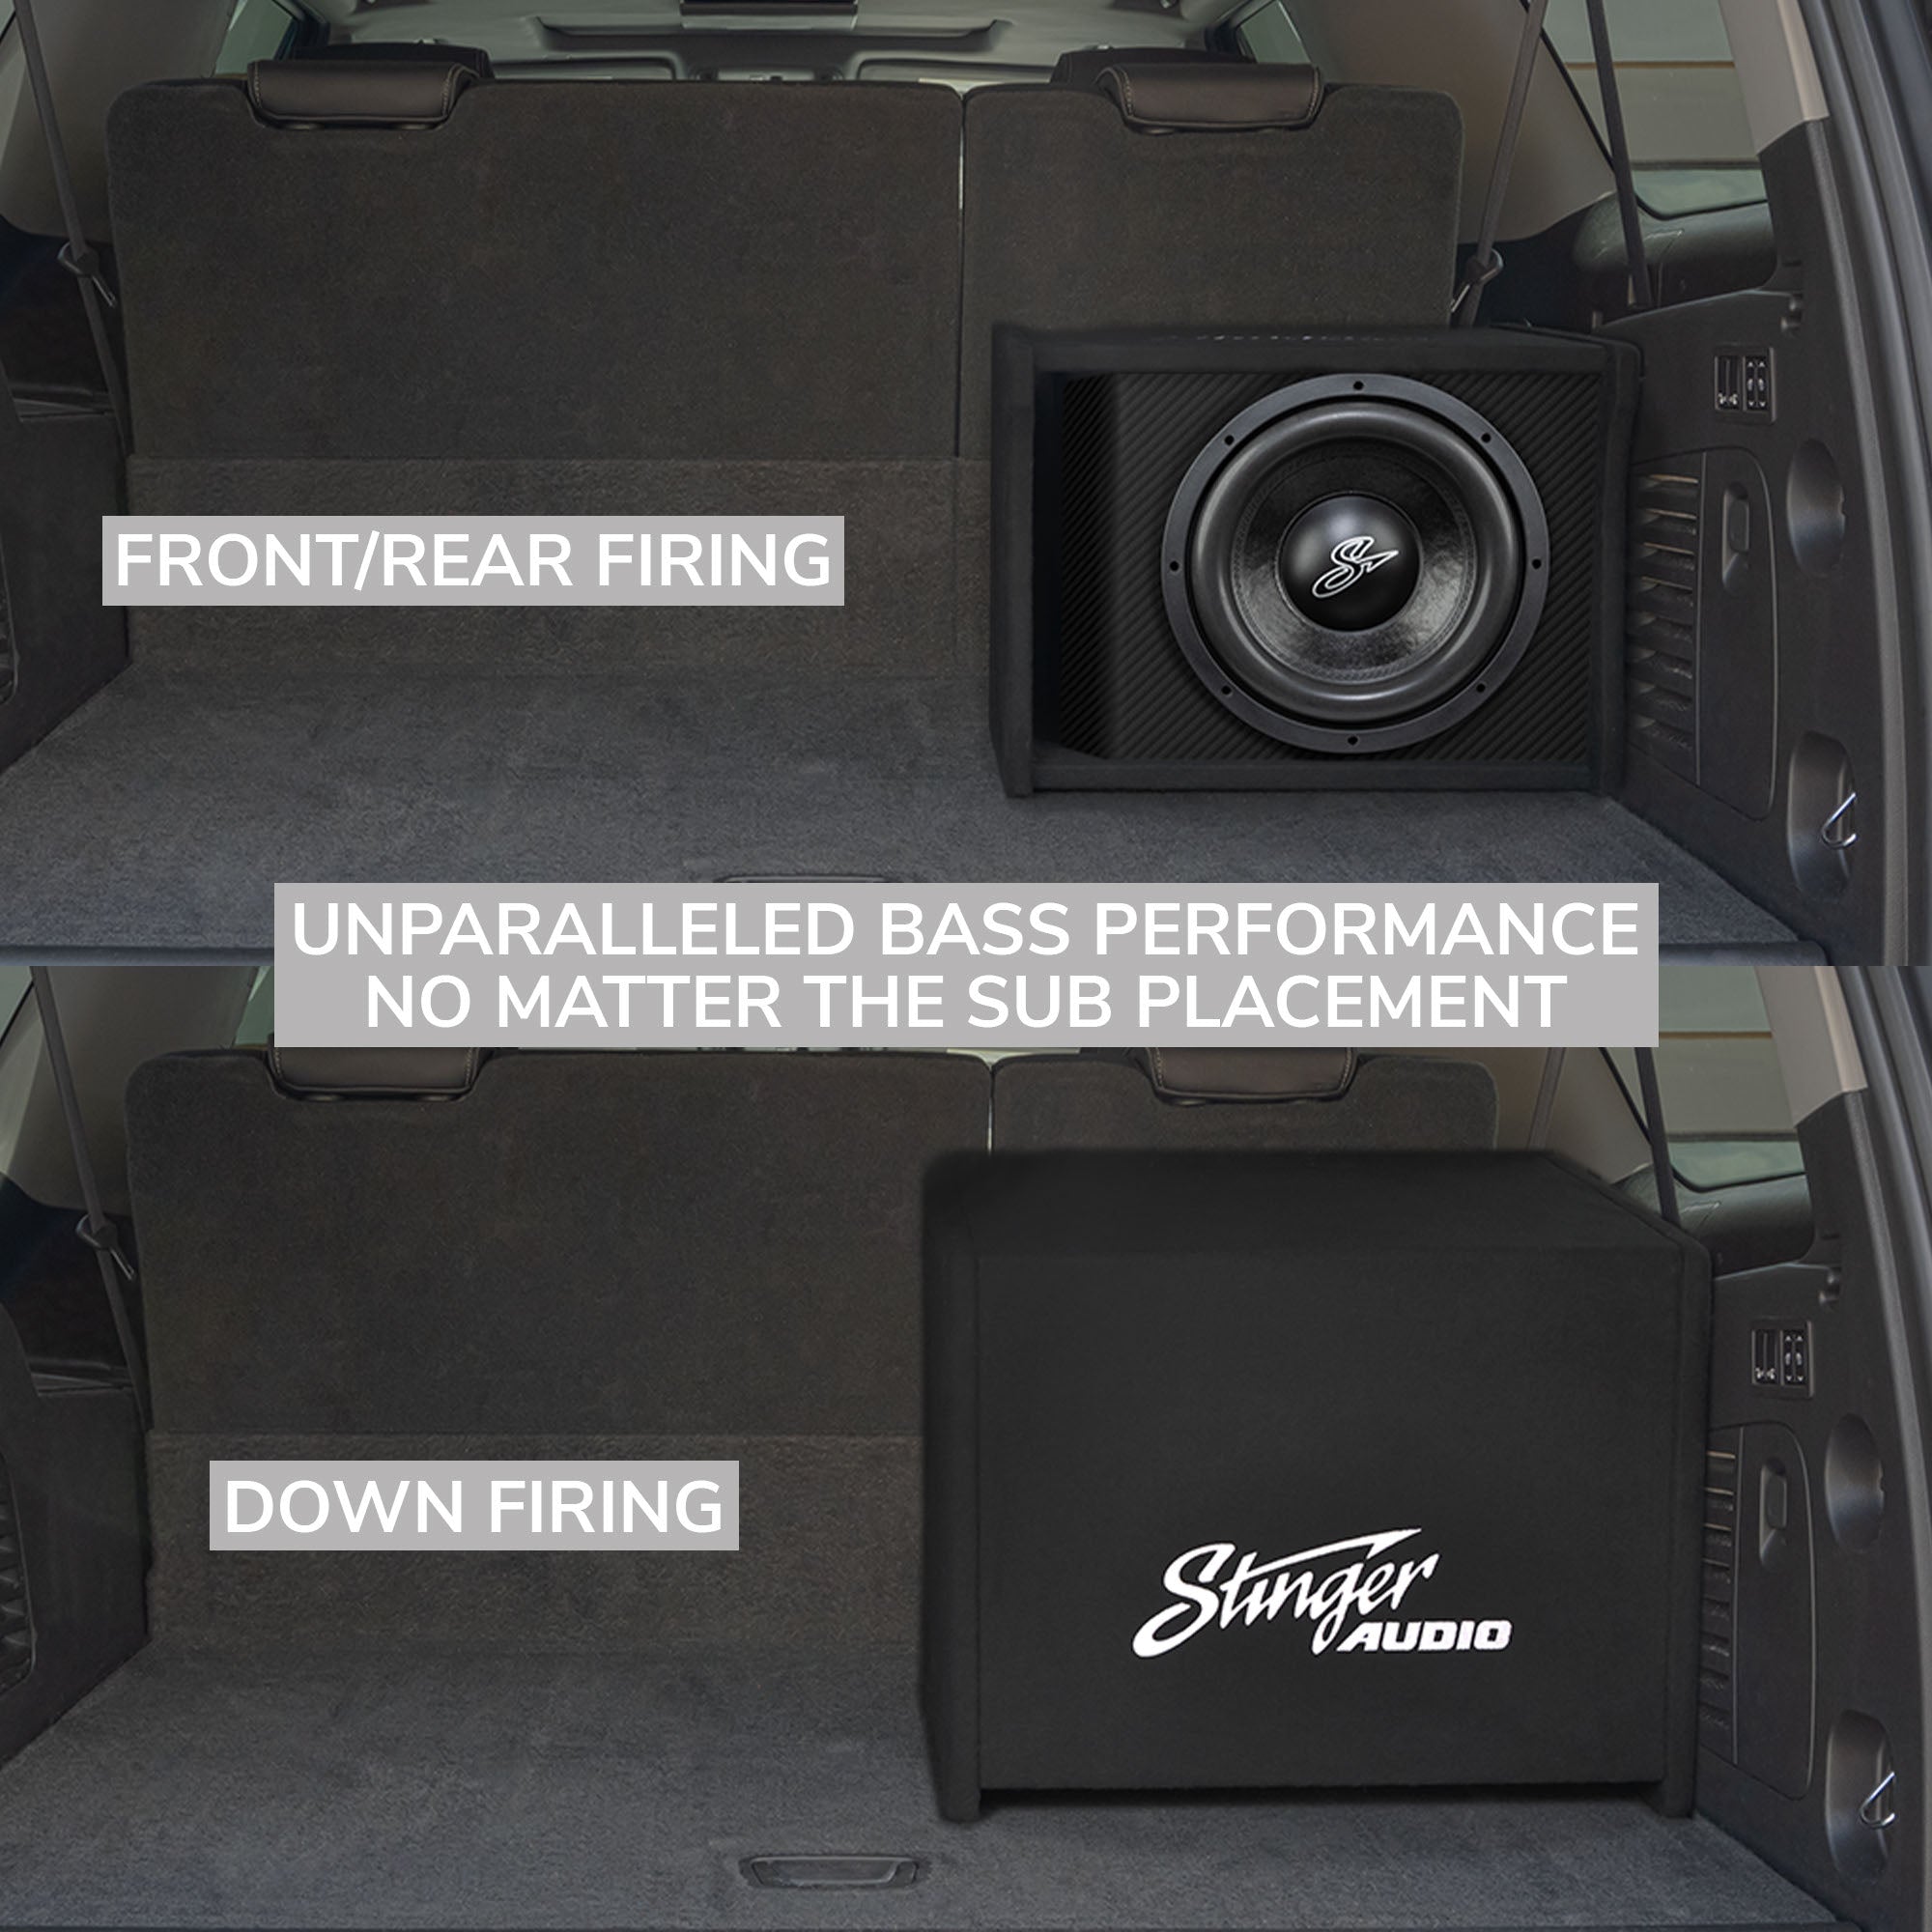 Single 12" 1,000 Watt (RMS) Loaded Ported Subwoofer Enclosure (1,000 Watts RMS/1,500 Watts Max) Bass Package with Amplifier & Complete Wiring Kit